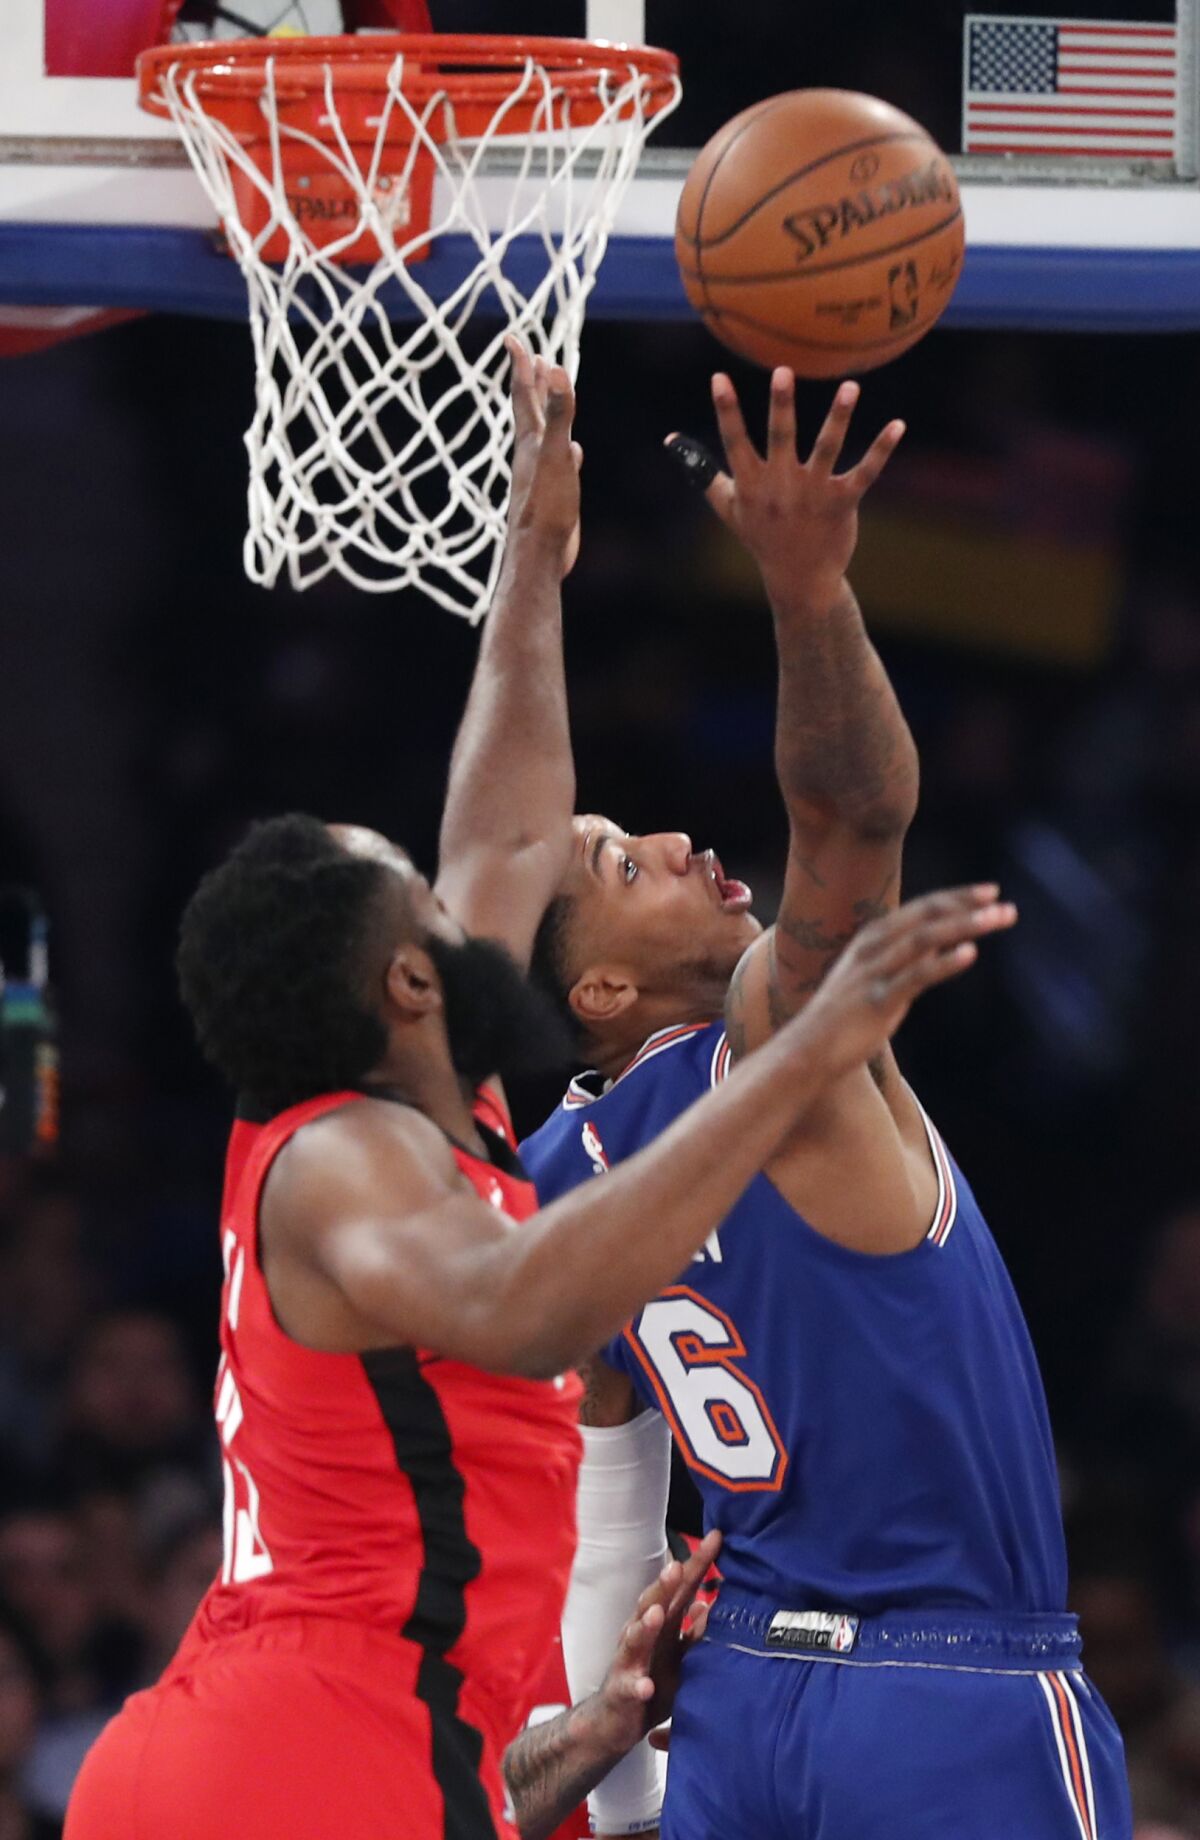 Houston Rockets guard James Harden, left, pressures New York Knicks guard Elfrid Payton (6) during the first quarter of an NBA basketball game in New York, Monday, March 2, 2020. (AP Photo/Kathy Willens)